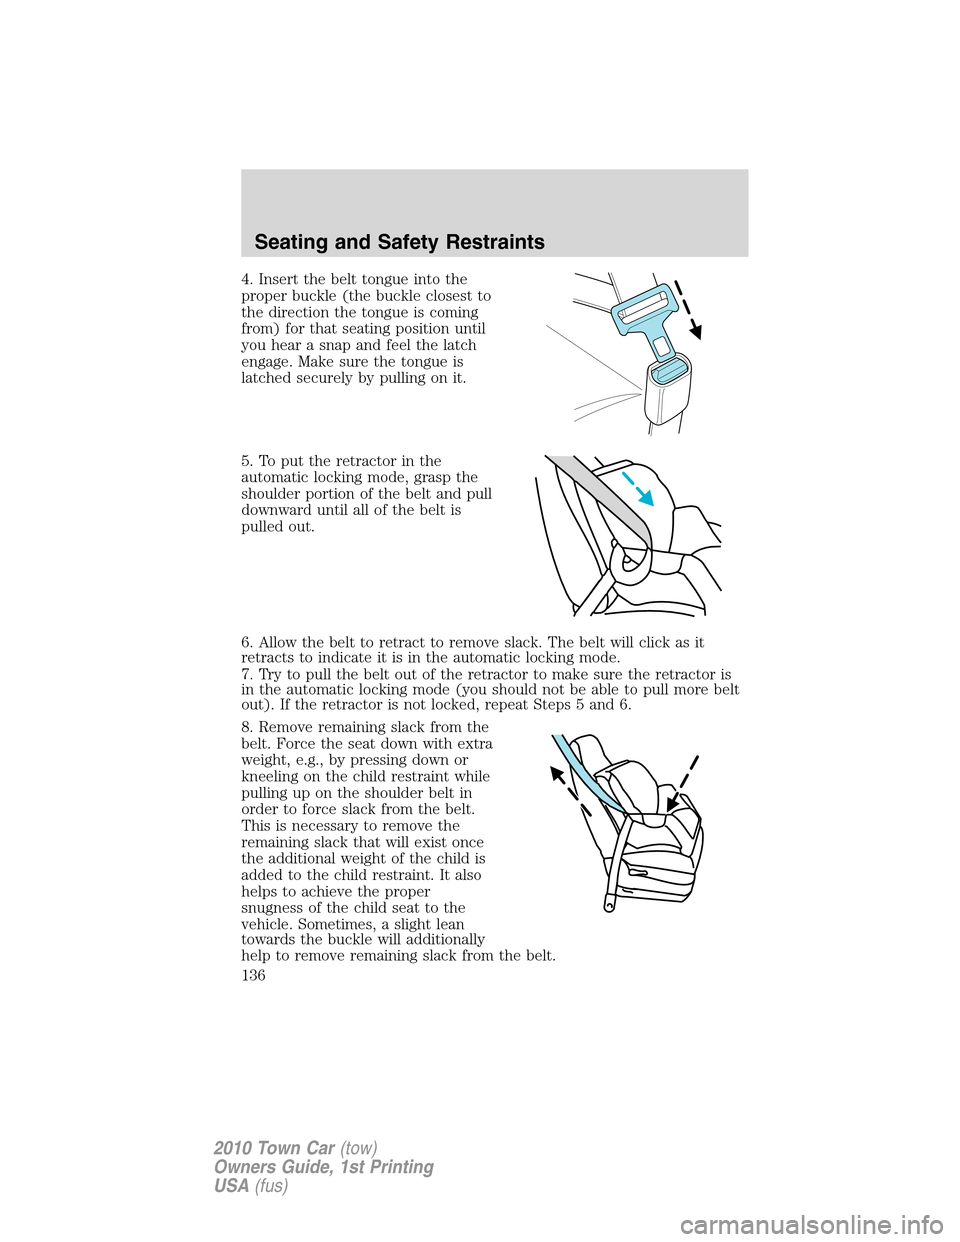 LINCOLN TOWN CAR 2010  Owners Manual 4. Insert the belt tongue into the
proper buckle (the buckle closest to
the direction the tongue is coming
from) for that seating position until
you hear a snap and feel the latch
engage. Make sure th